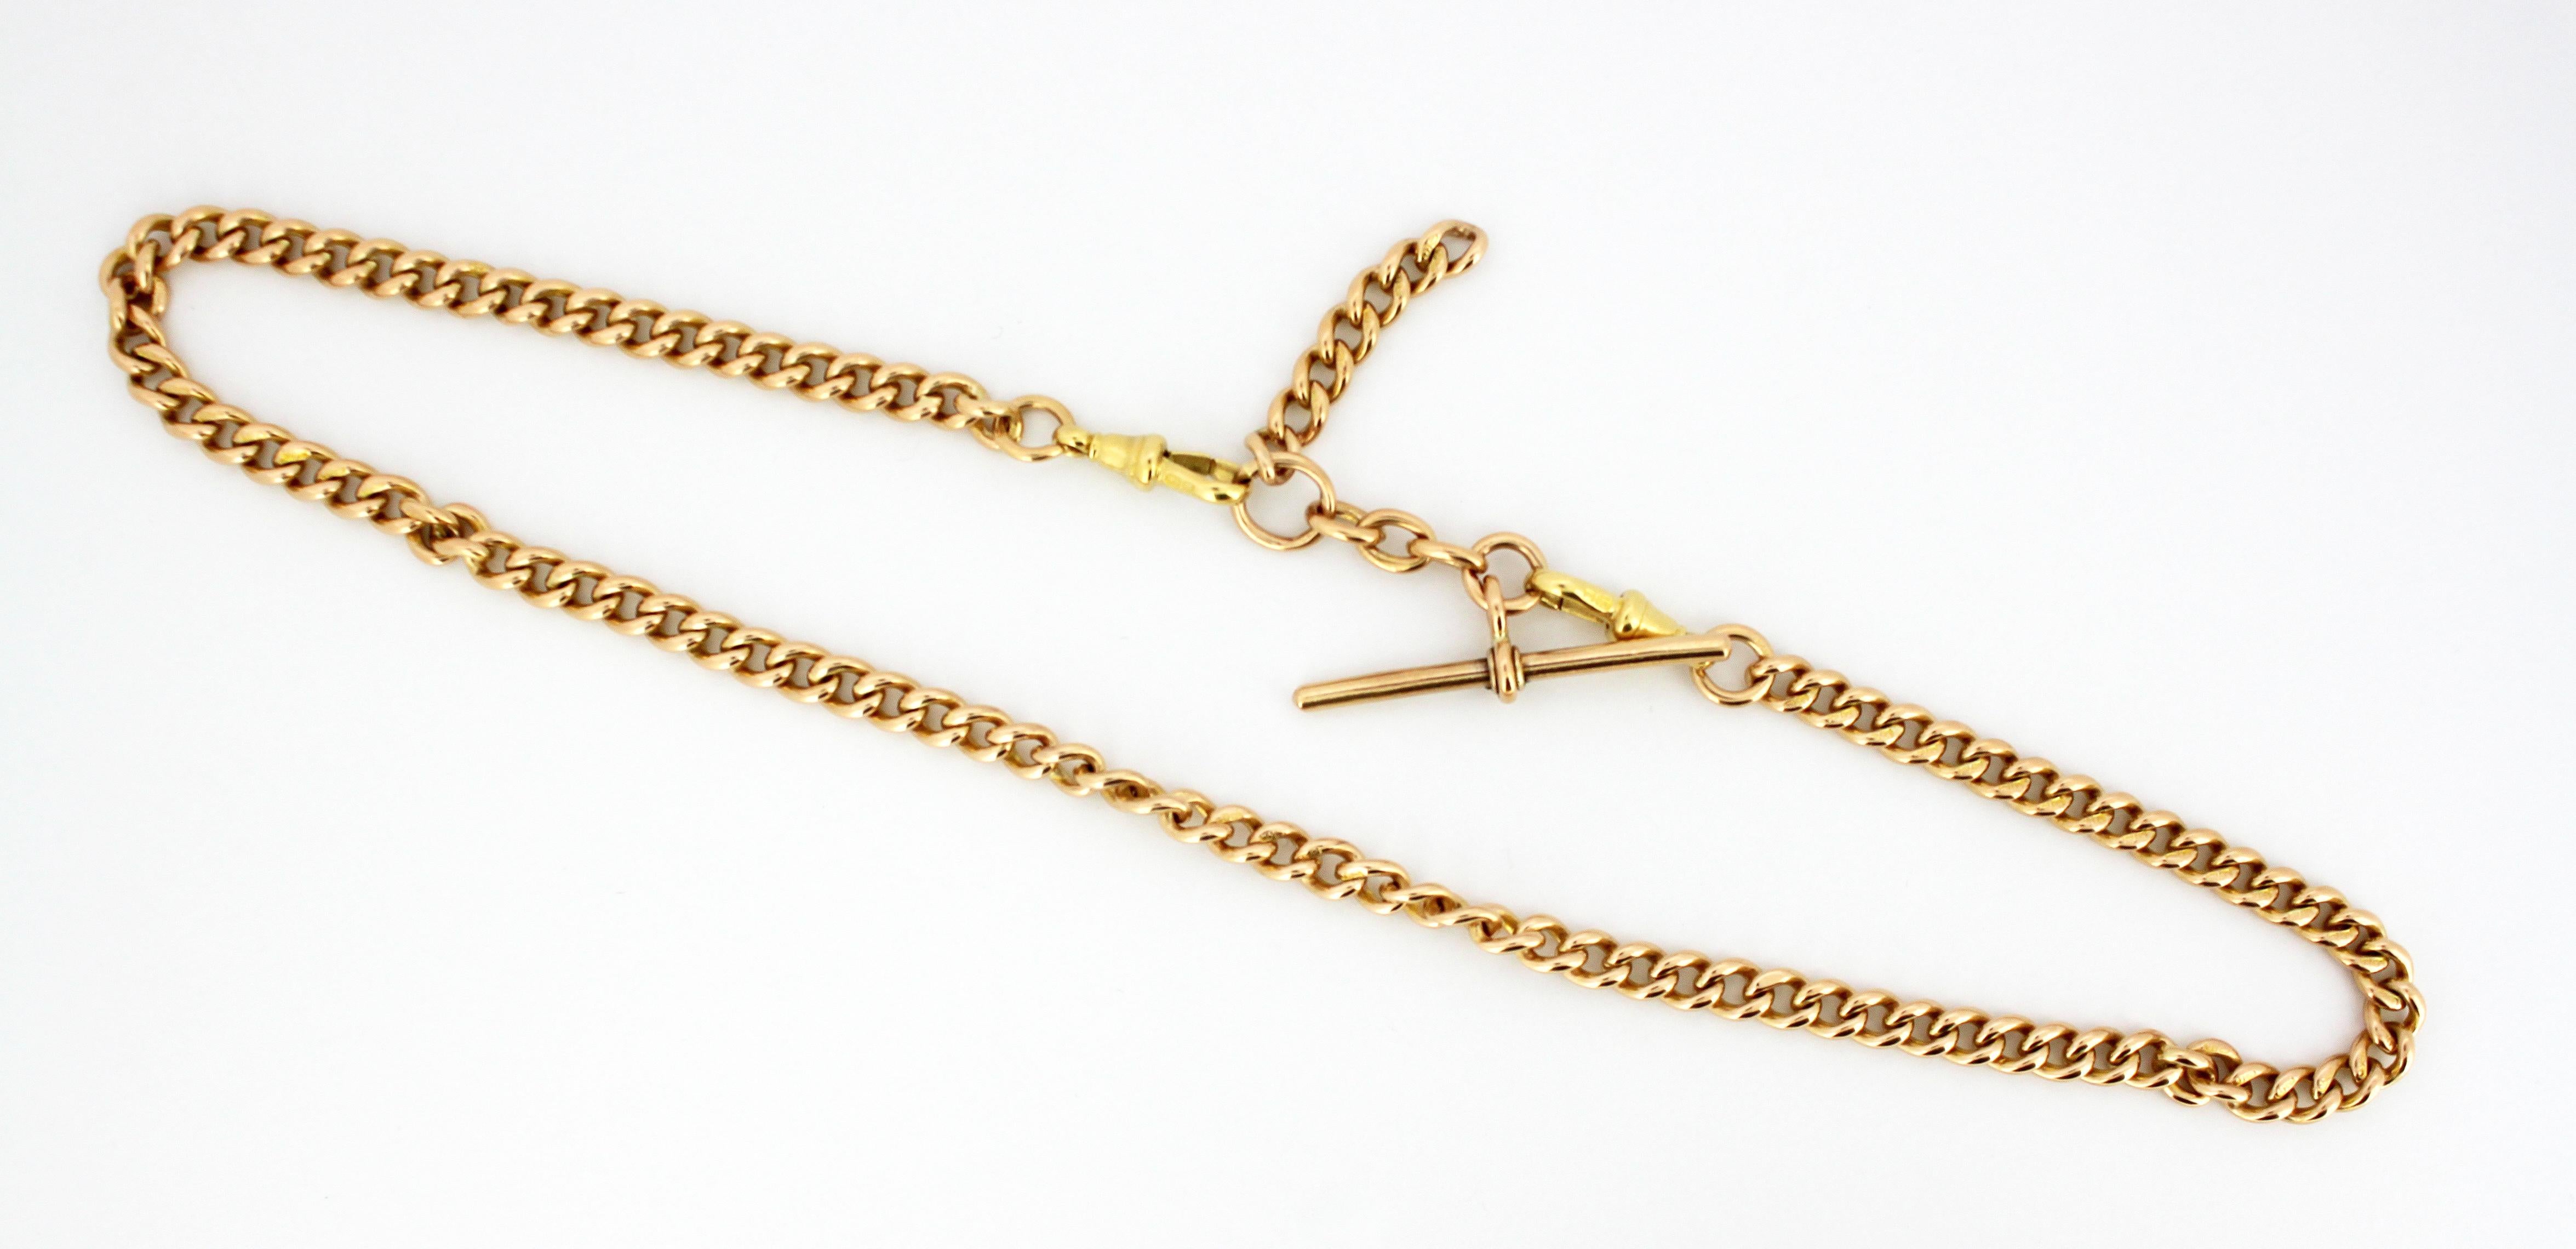 Antique Victorian 18kt yellow gold albert chain.
Made in Sheffield, England Circa 1880's
Each link hallmarked 18kt gold & Sheffield town stamp

Dimensions - 
Length x Width : 46 x 0.65 cm
Total weight : 62 grams

Condition : Chain is antique, minor